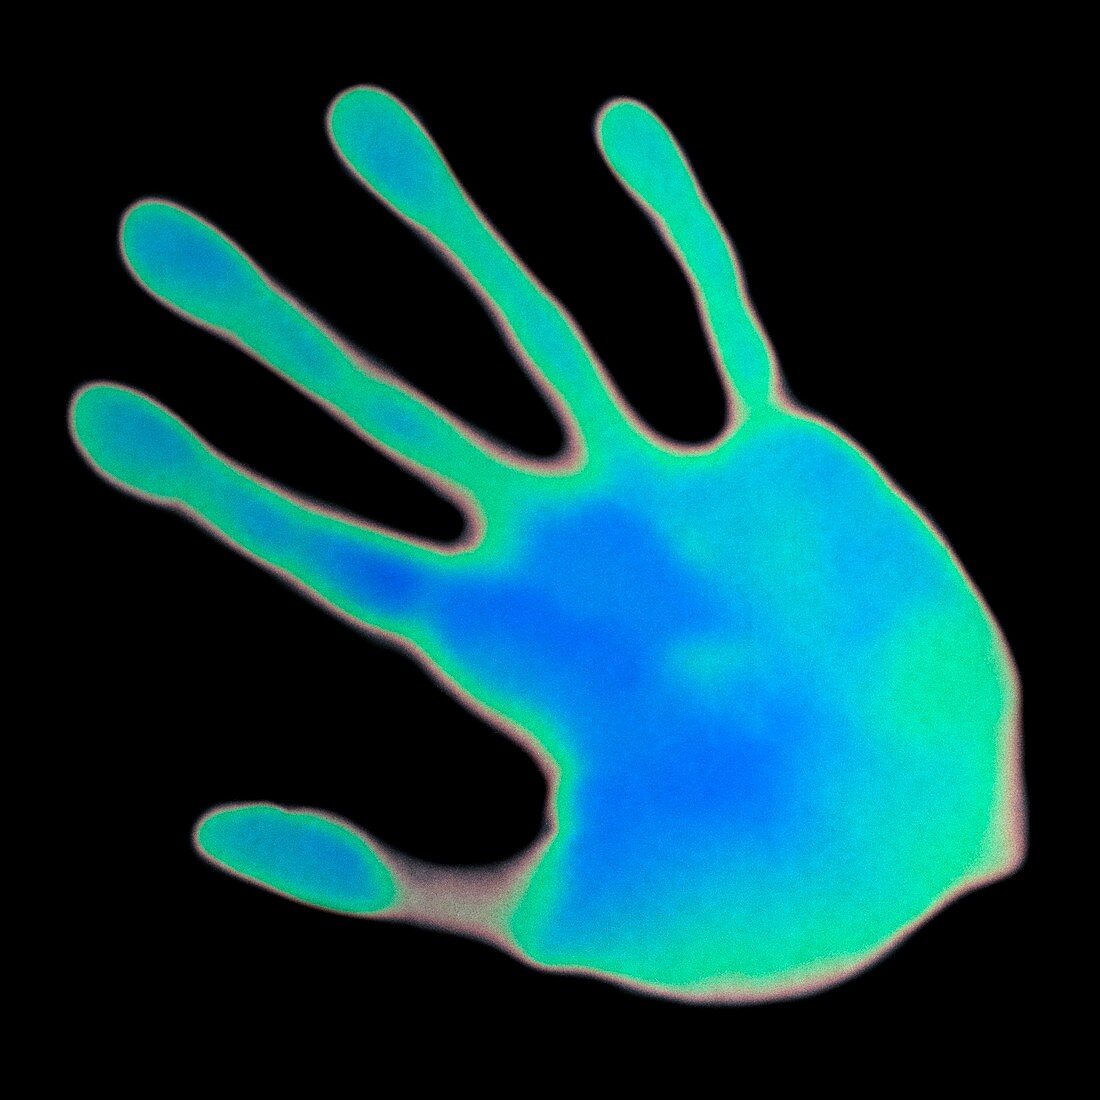 Hand print on thermochromic paper